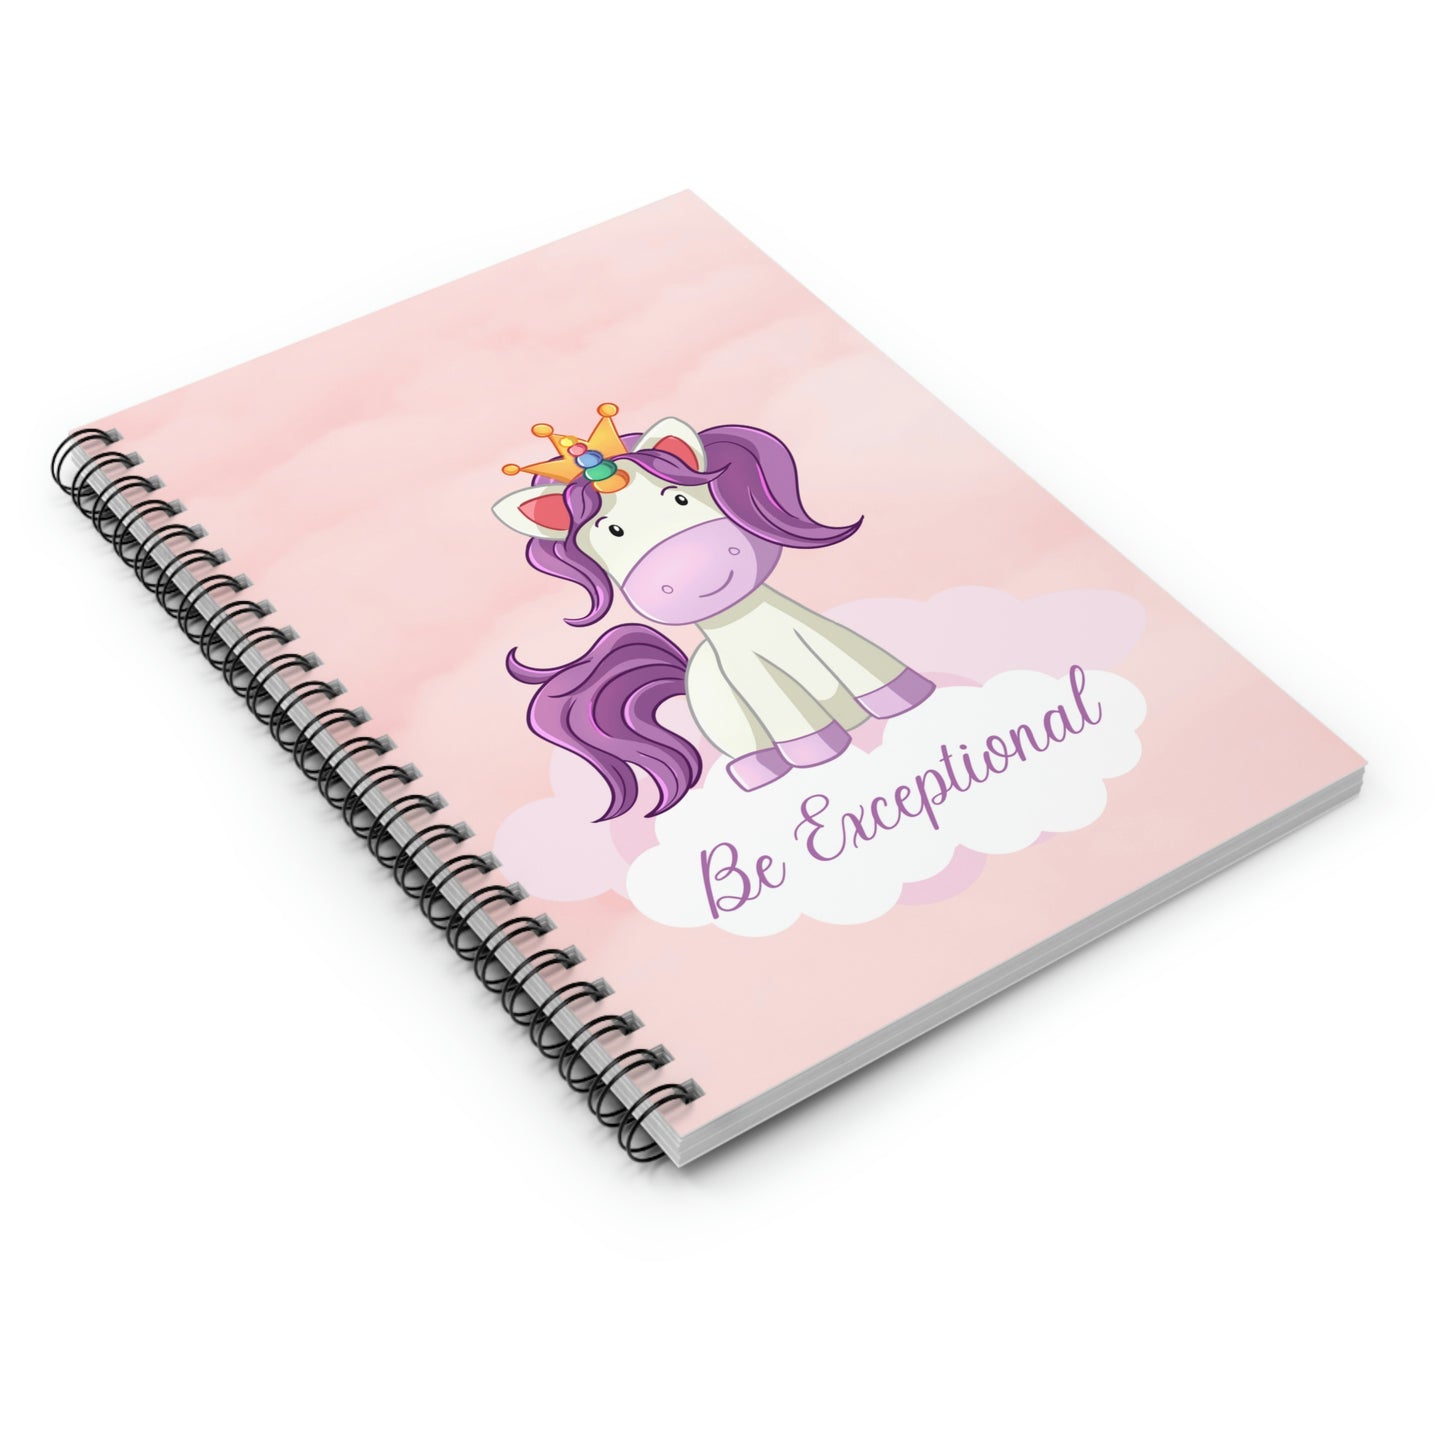 Be Exceptional - Spiral Notebook - Ruled Line